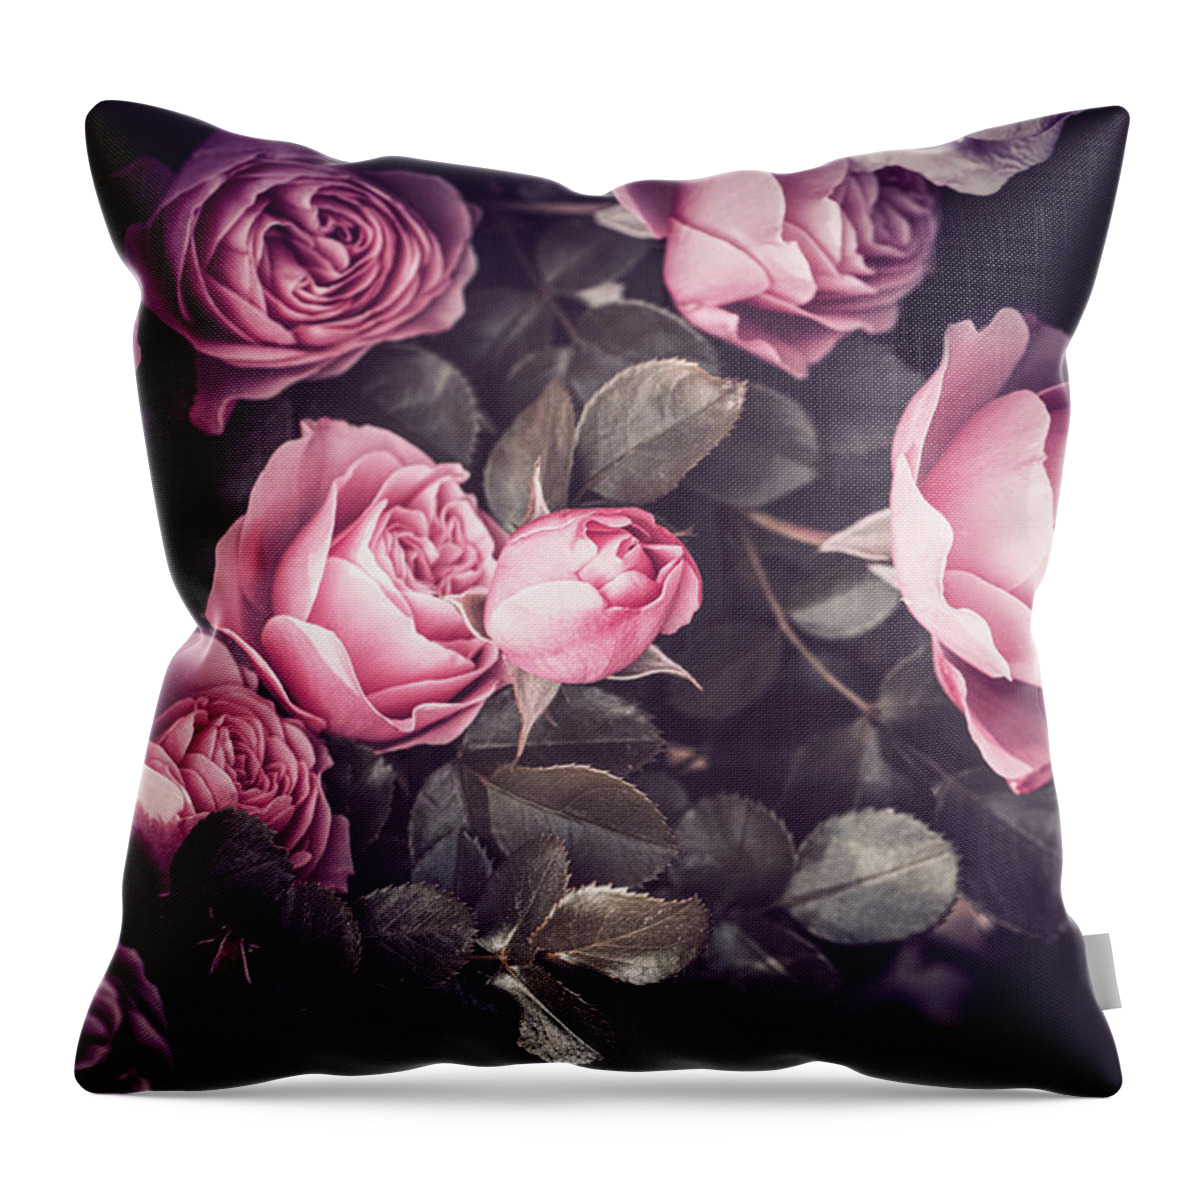 Roses Throw Pillow featuring the photograph Roses by Philippe Sainte-Laudy